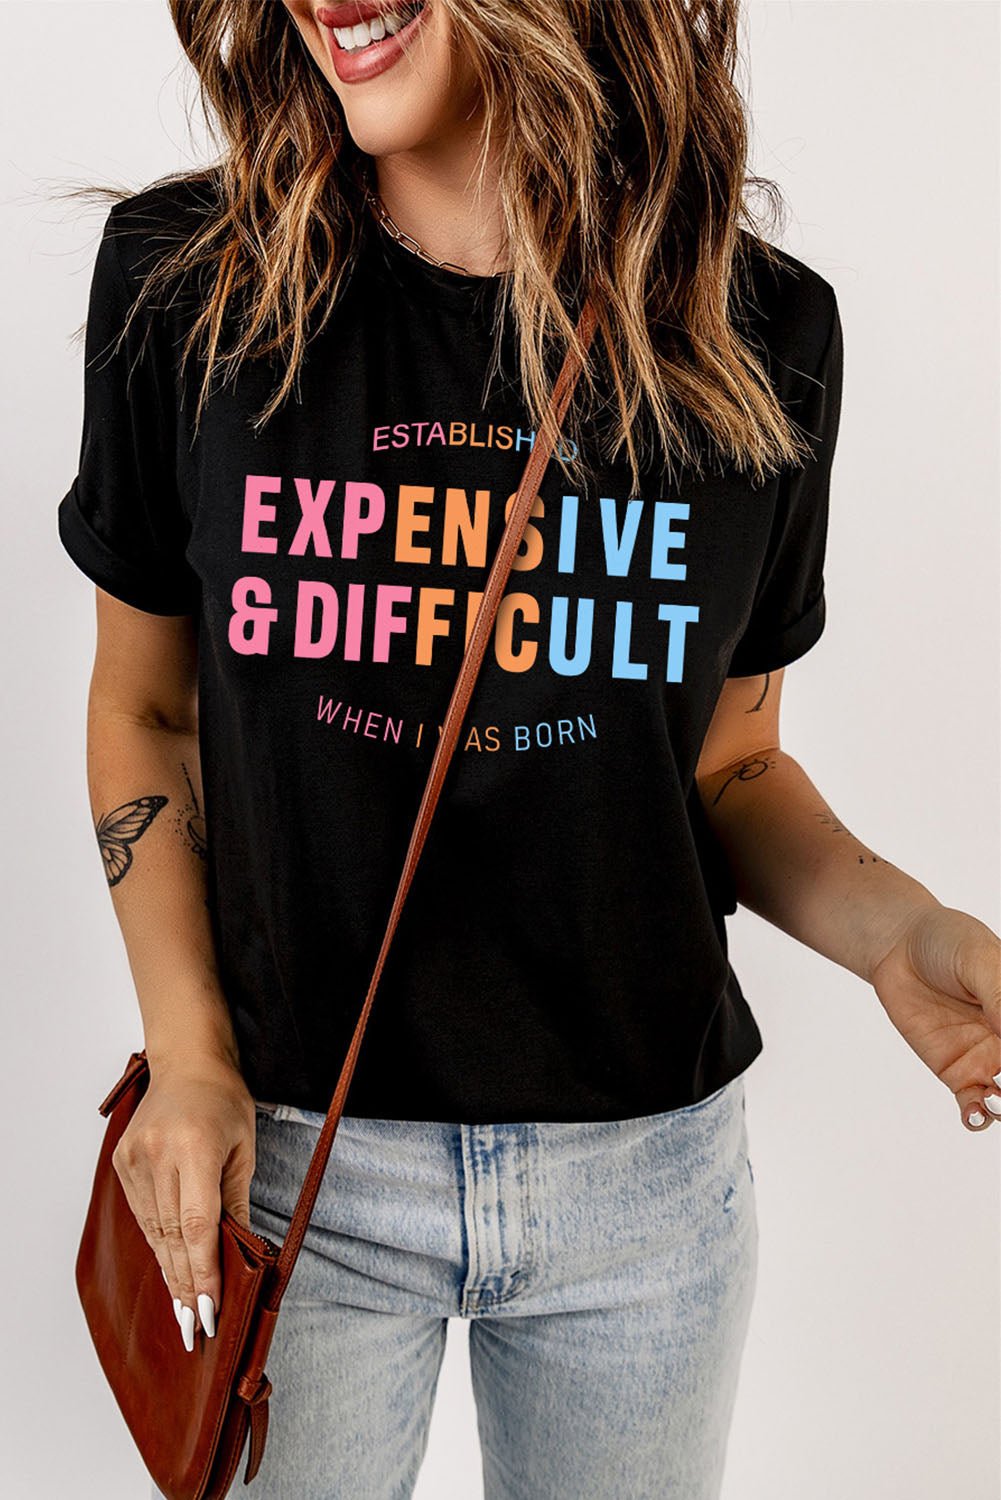 Expensive Cuffed Sleeve Tee - Talk to the tee store